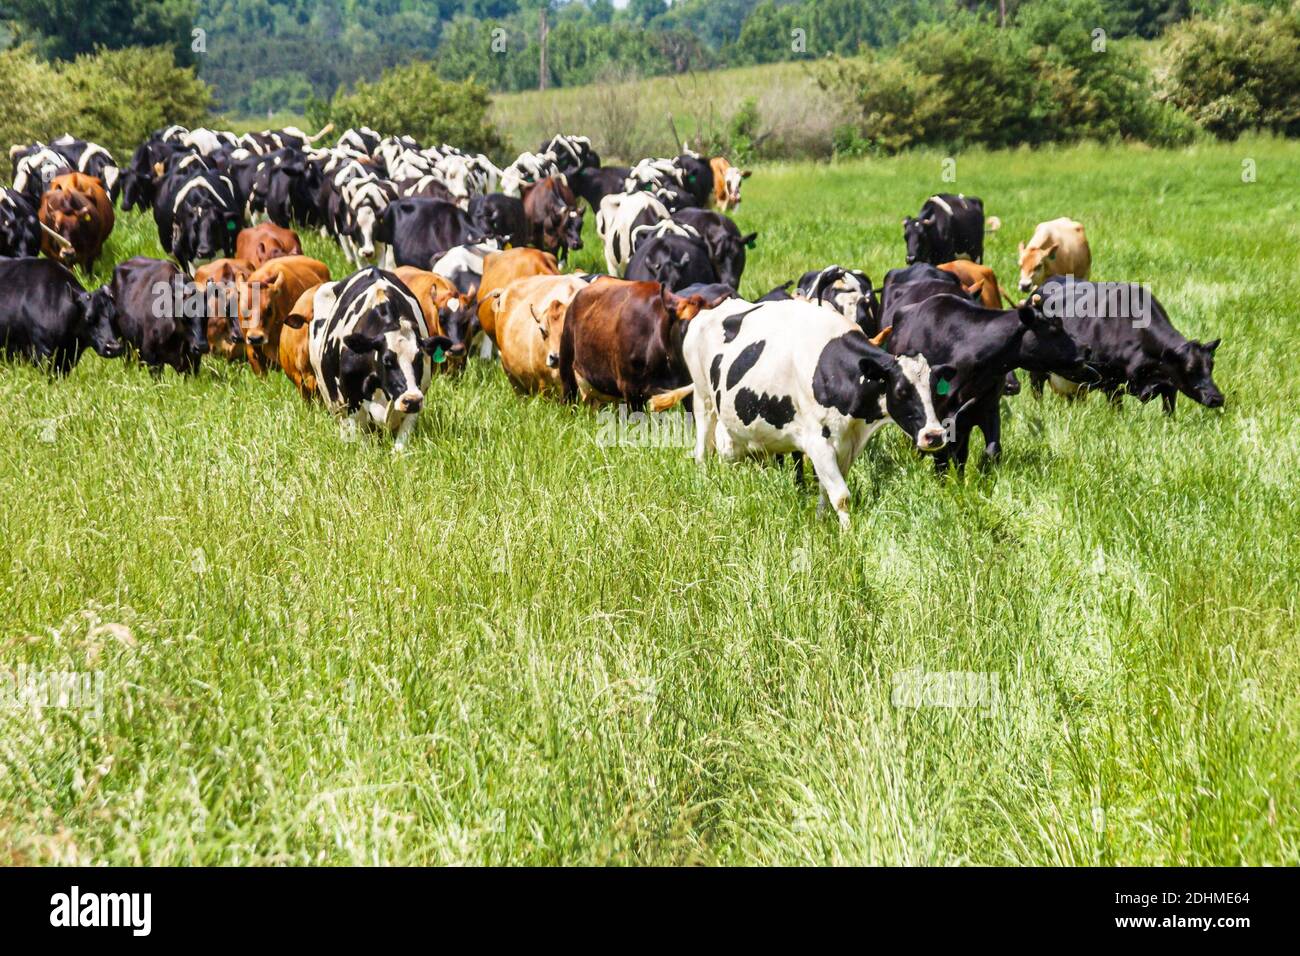 Alabama Alexandria Wright Dairy farm calves cows pasture,wholesale cheese producer farm dairy cow coming home from pasture, Stock Photo